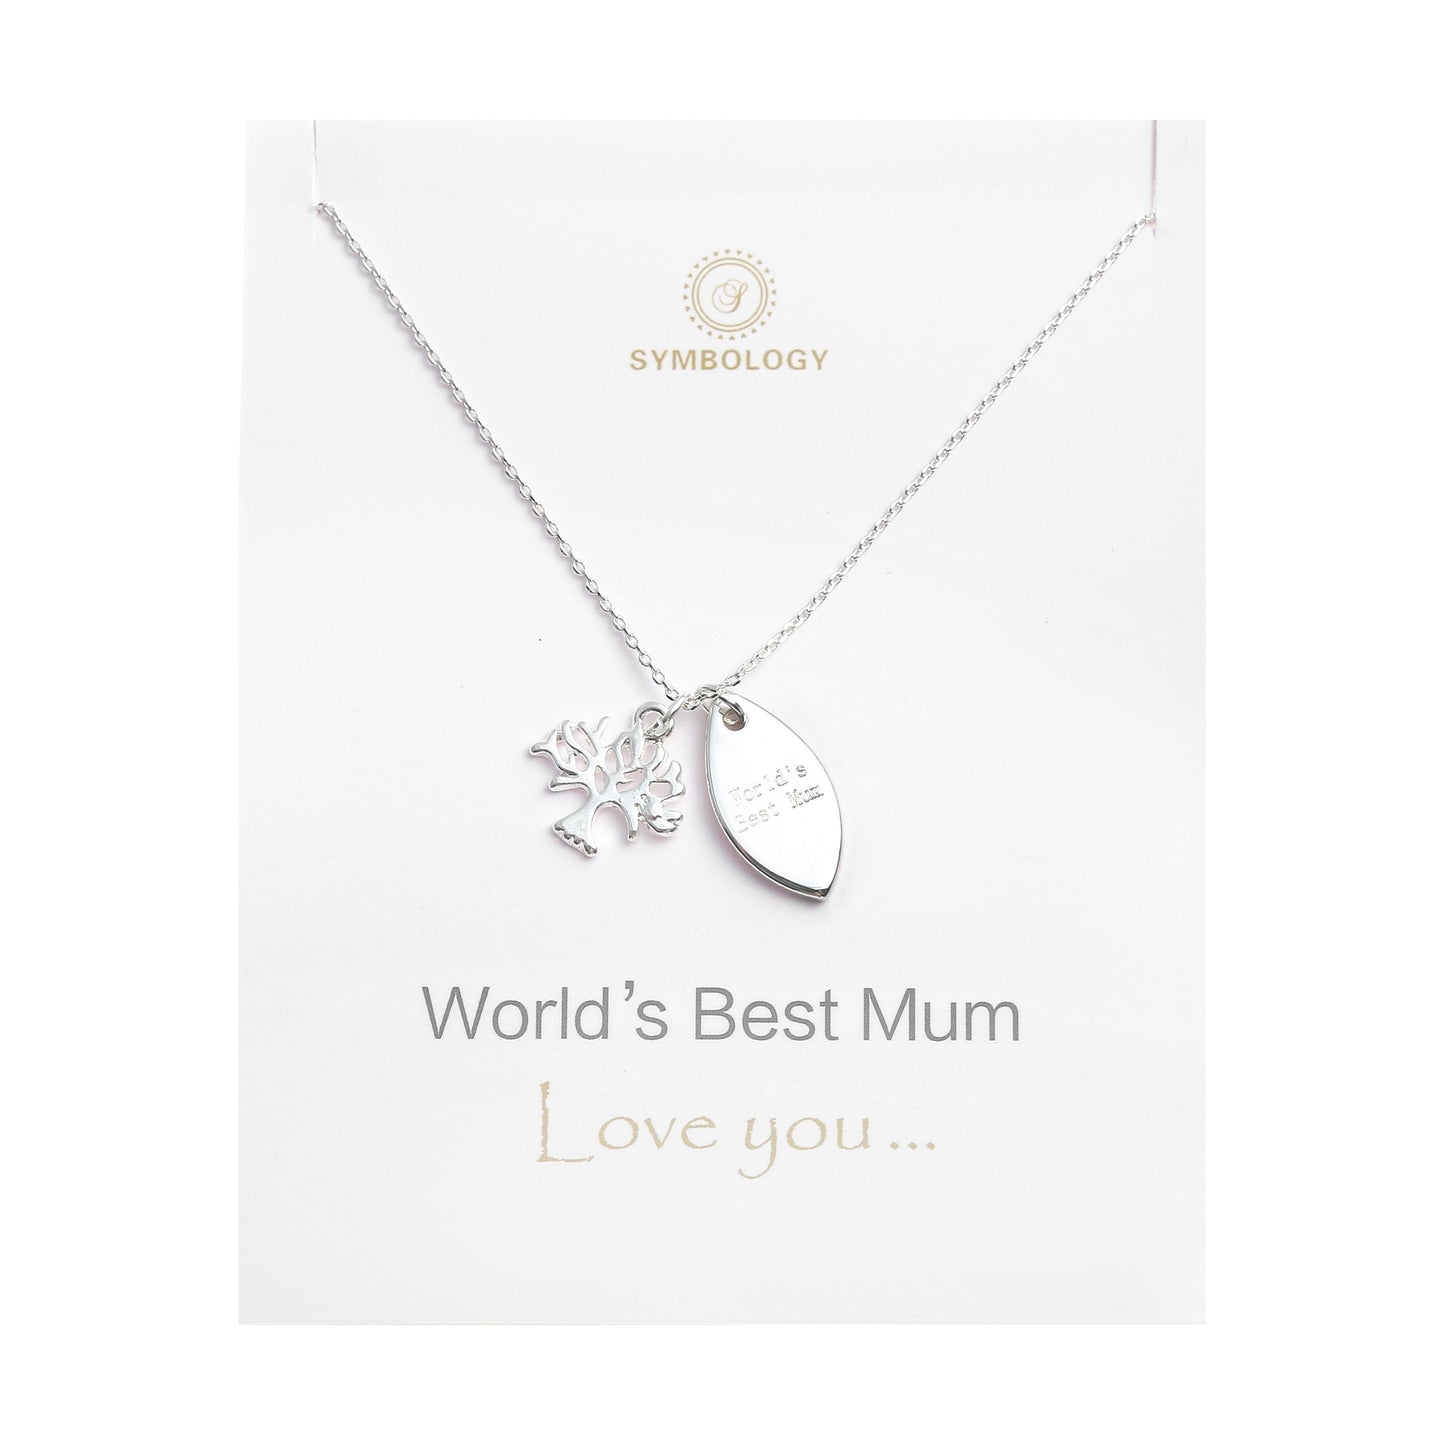 World's Best Mum Necklace, Silver Tree of Life Pendant Charm, Symbology, Symbol Necklace, Mother's Gift, Mother&Daughter, Family(Gift boxed)